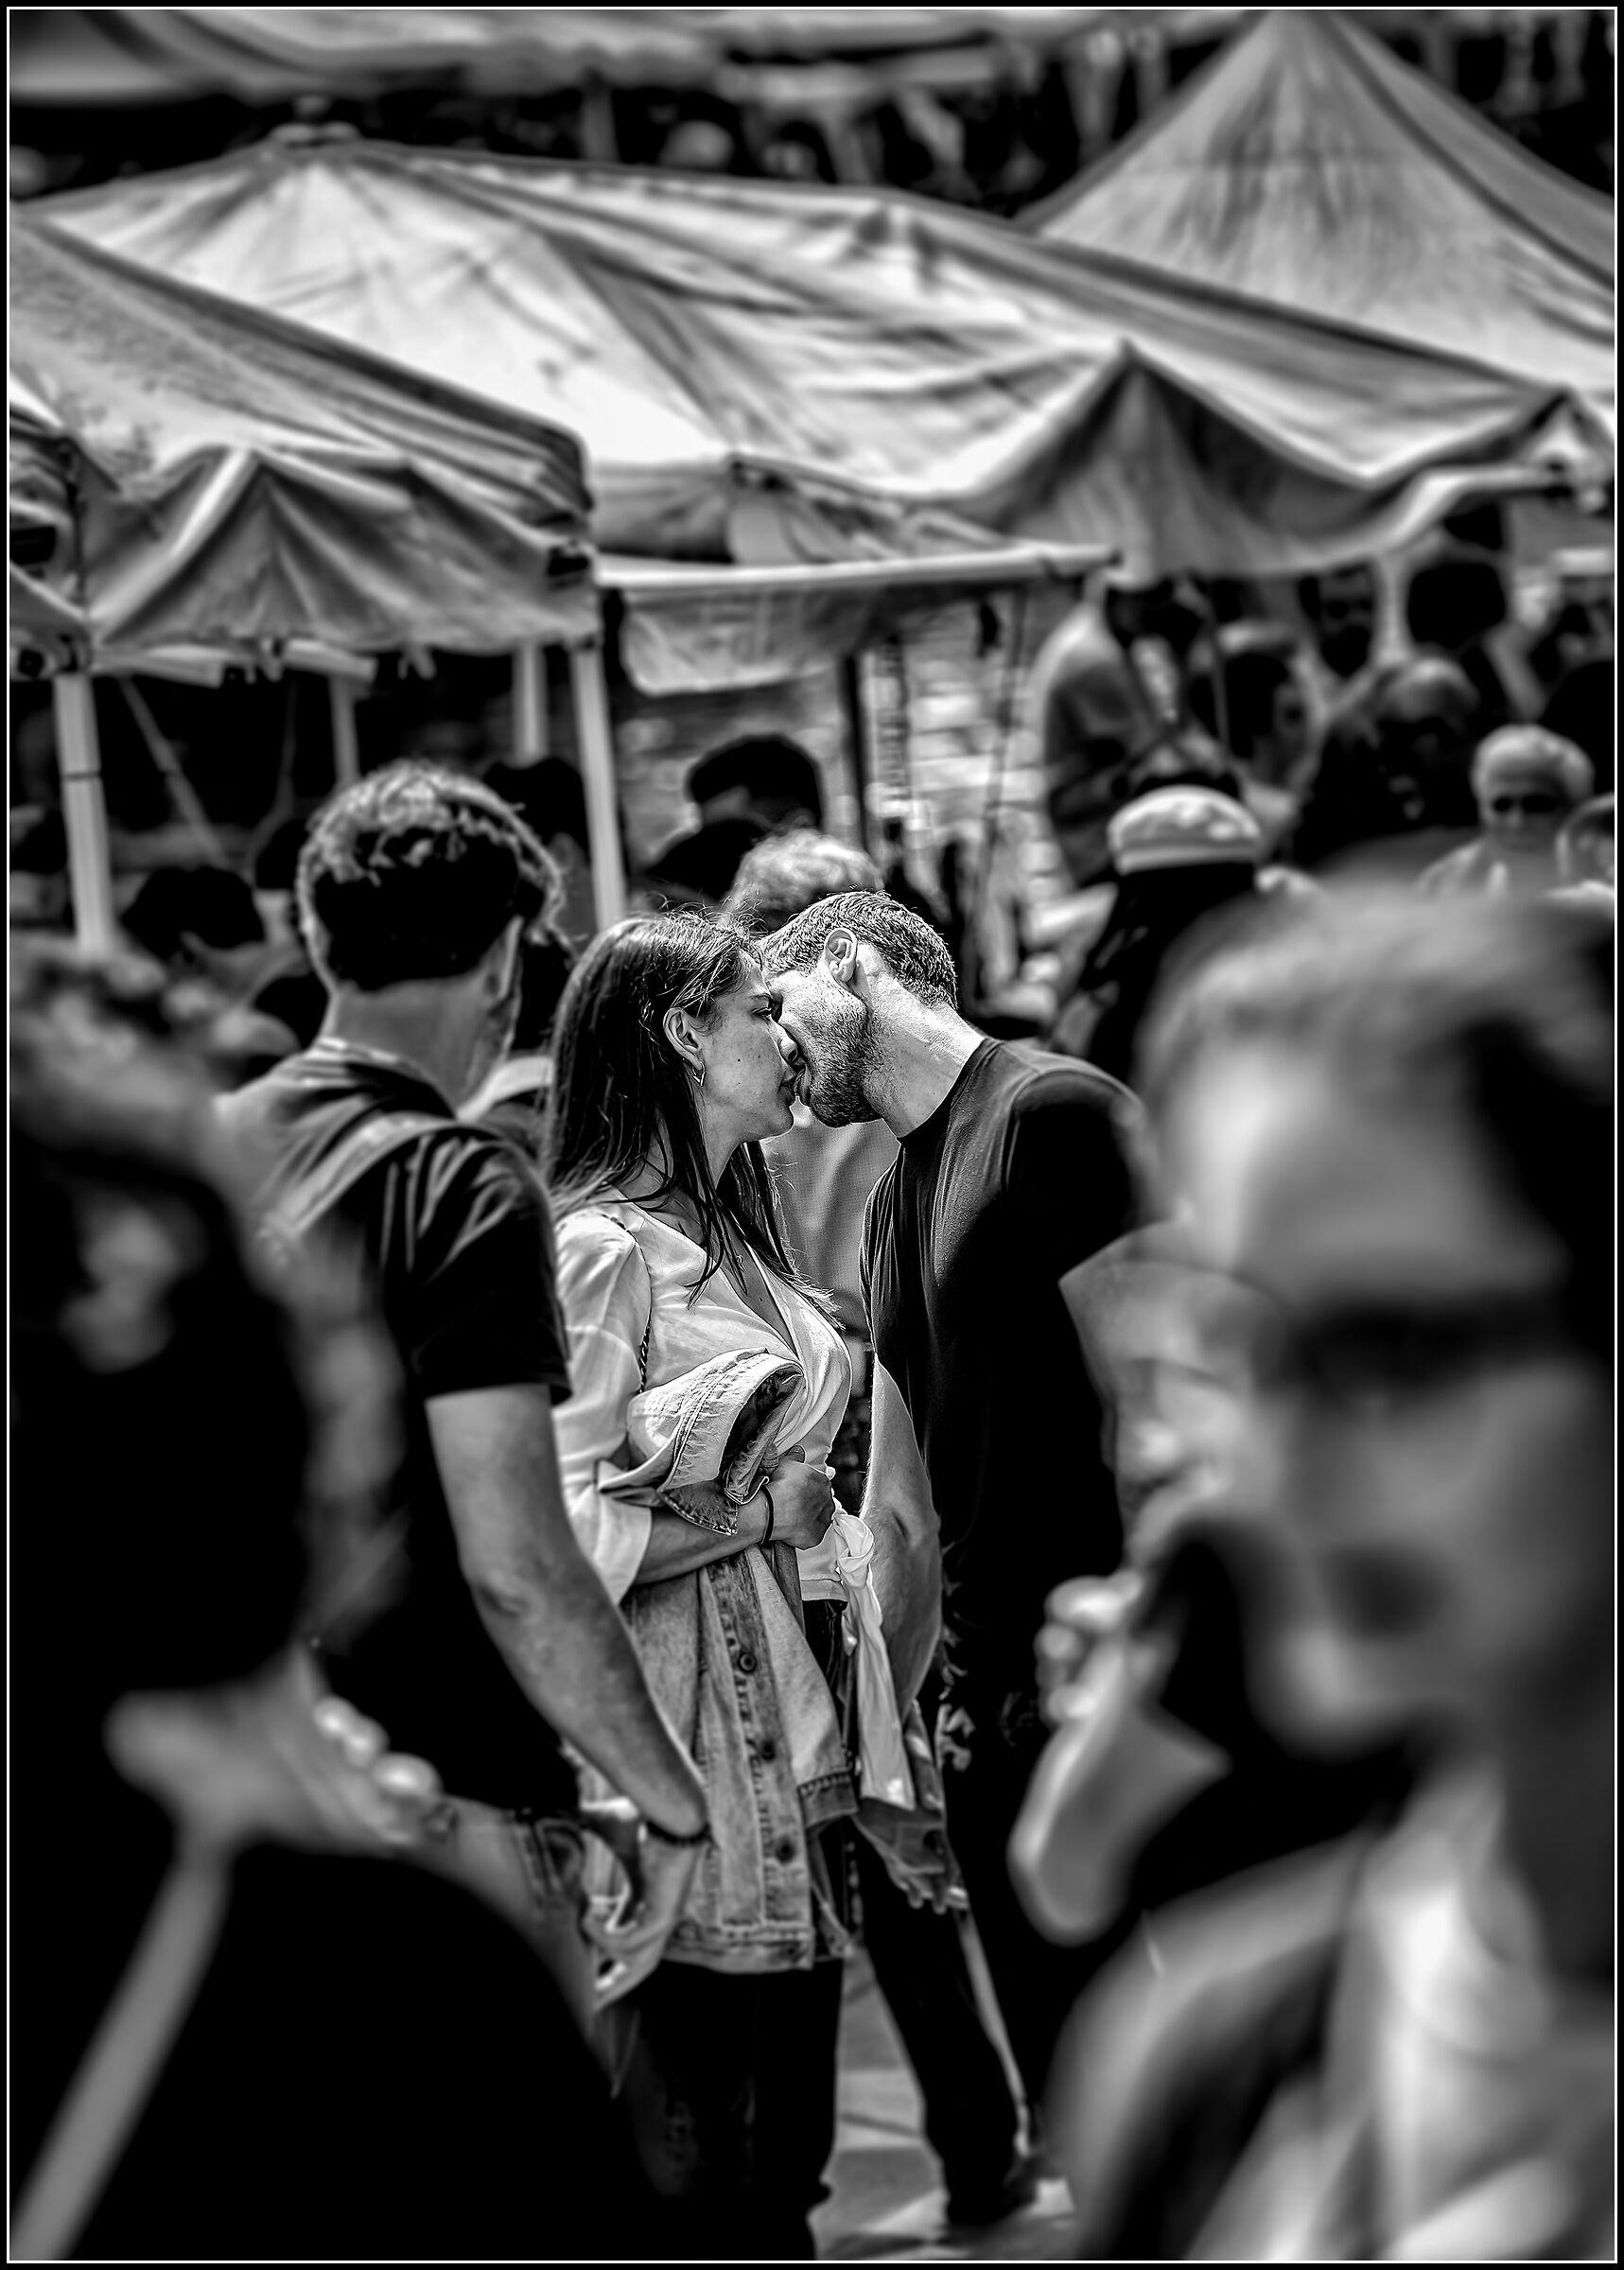 A kiss in the market frenzy...